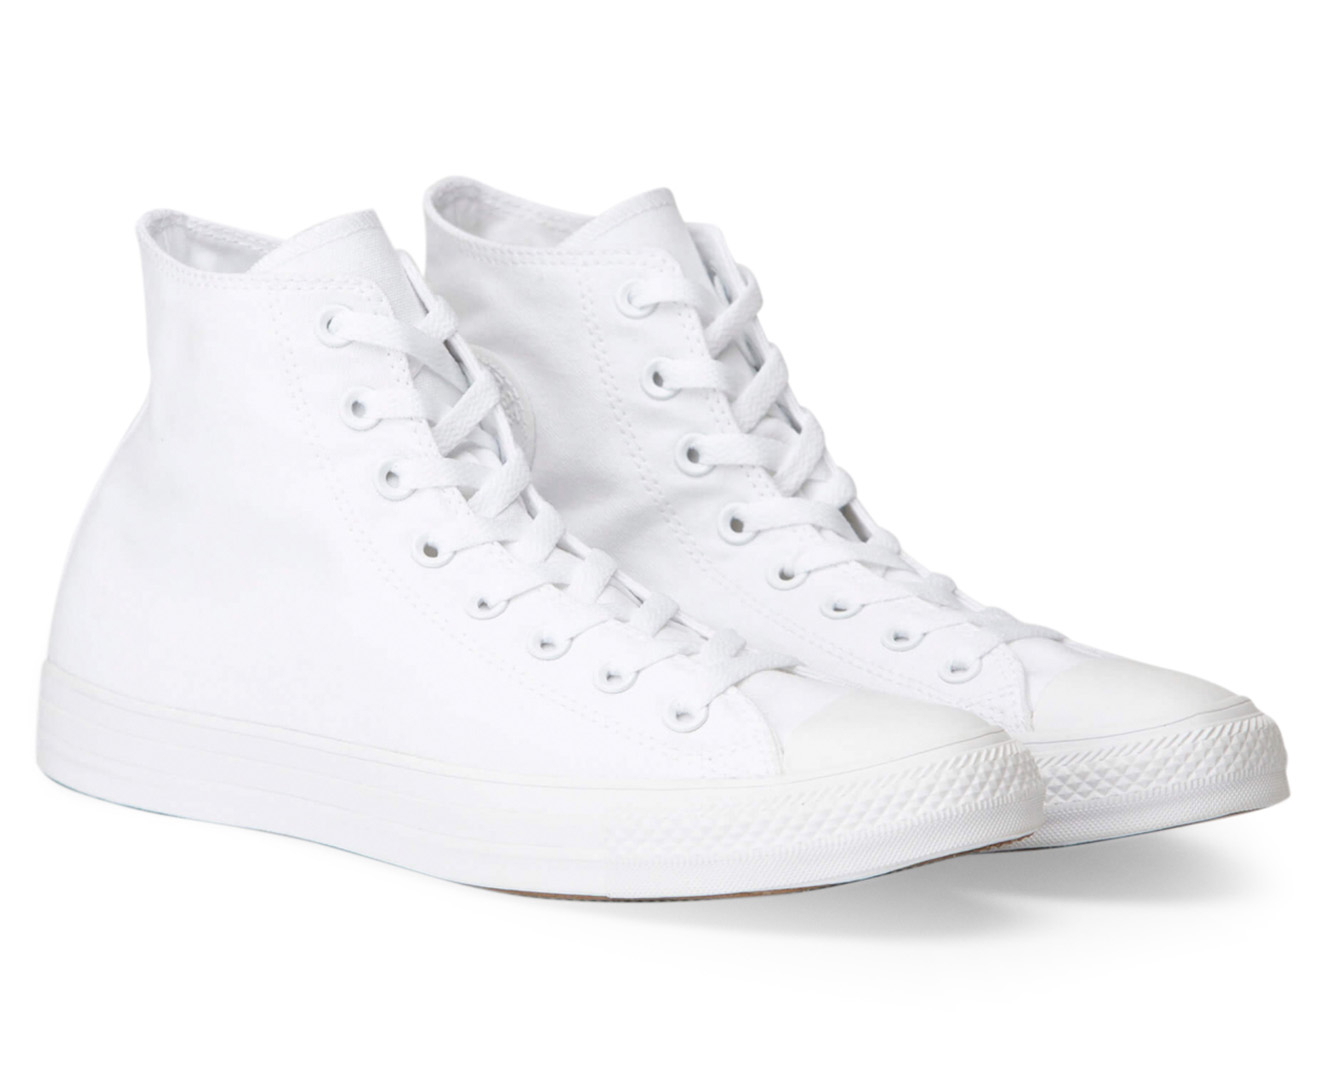 Converse Unisex Chuck Taylor All Star High Top Sneakers - White/Silver ...